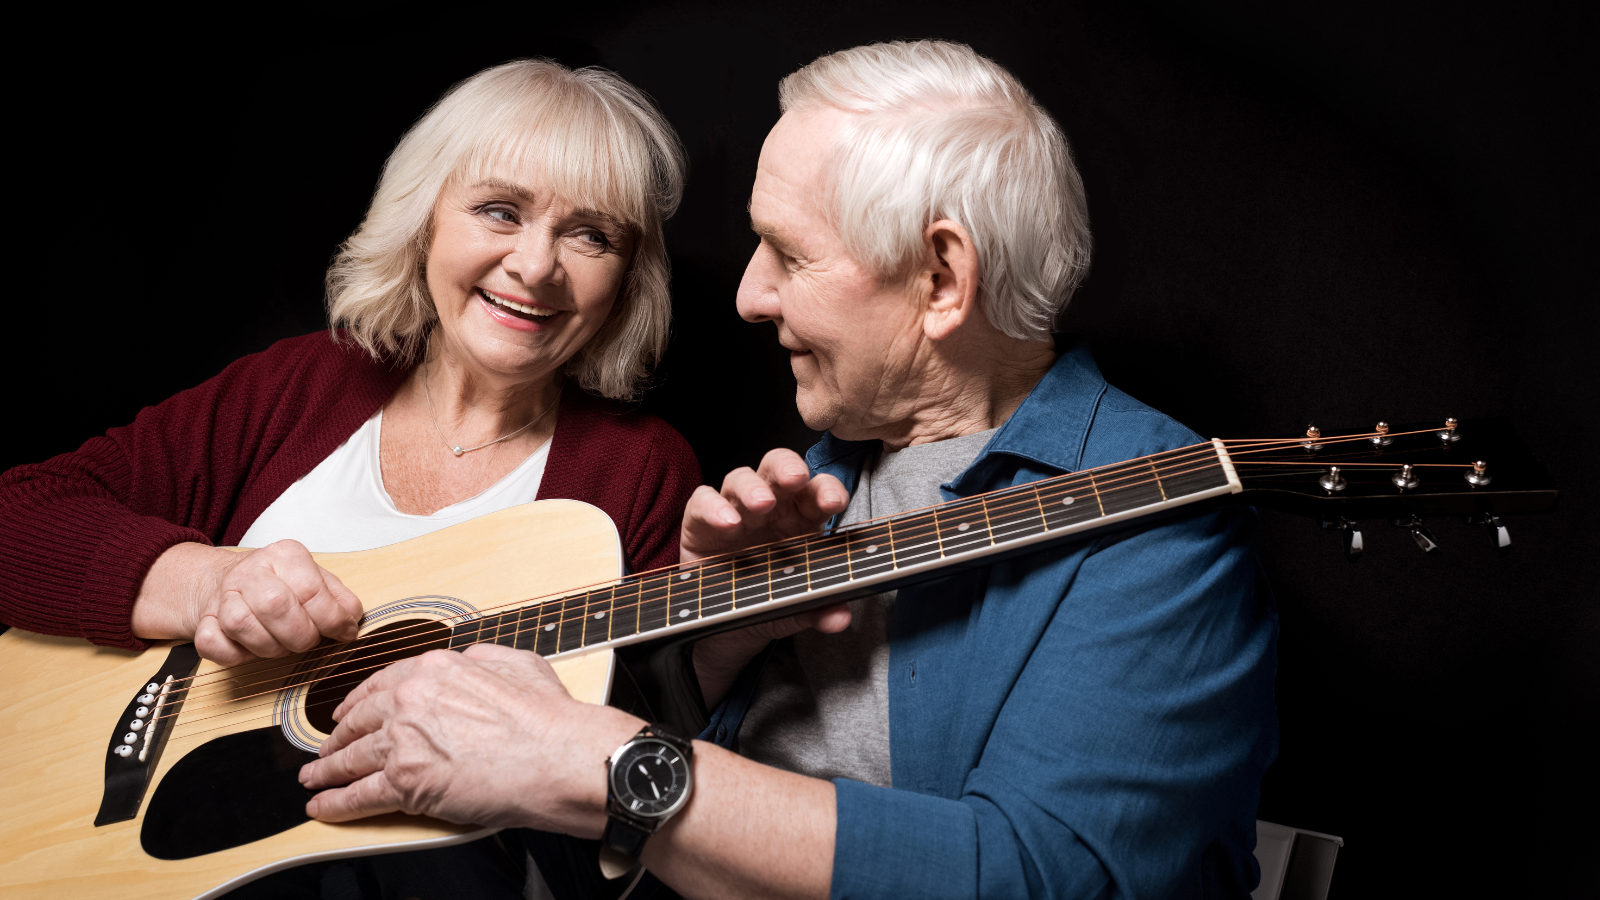 couple playing guitar smiling